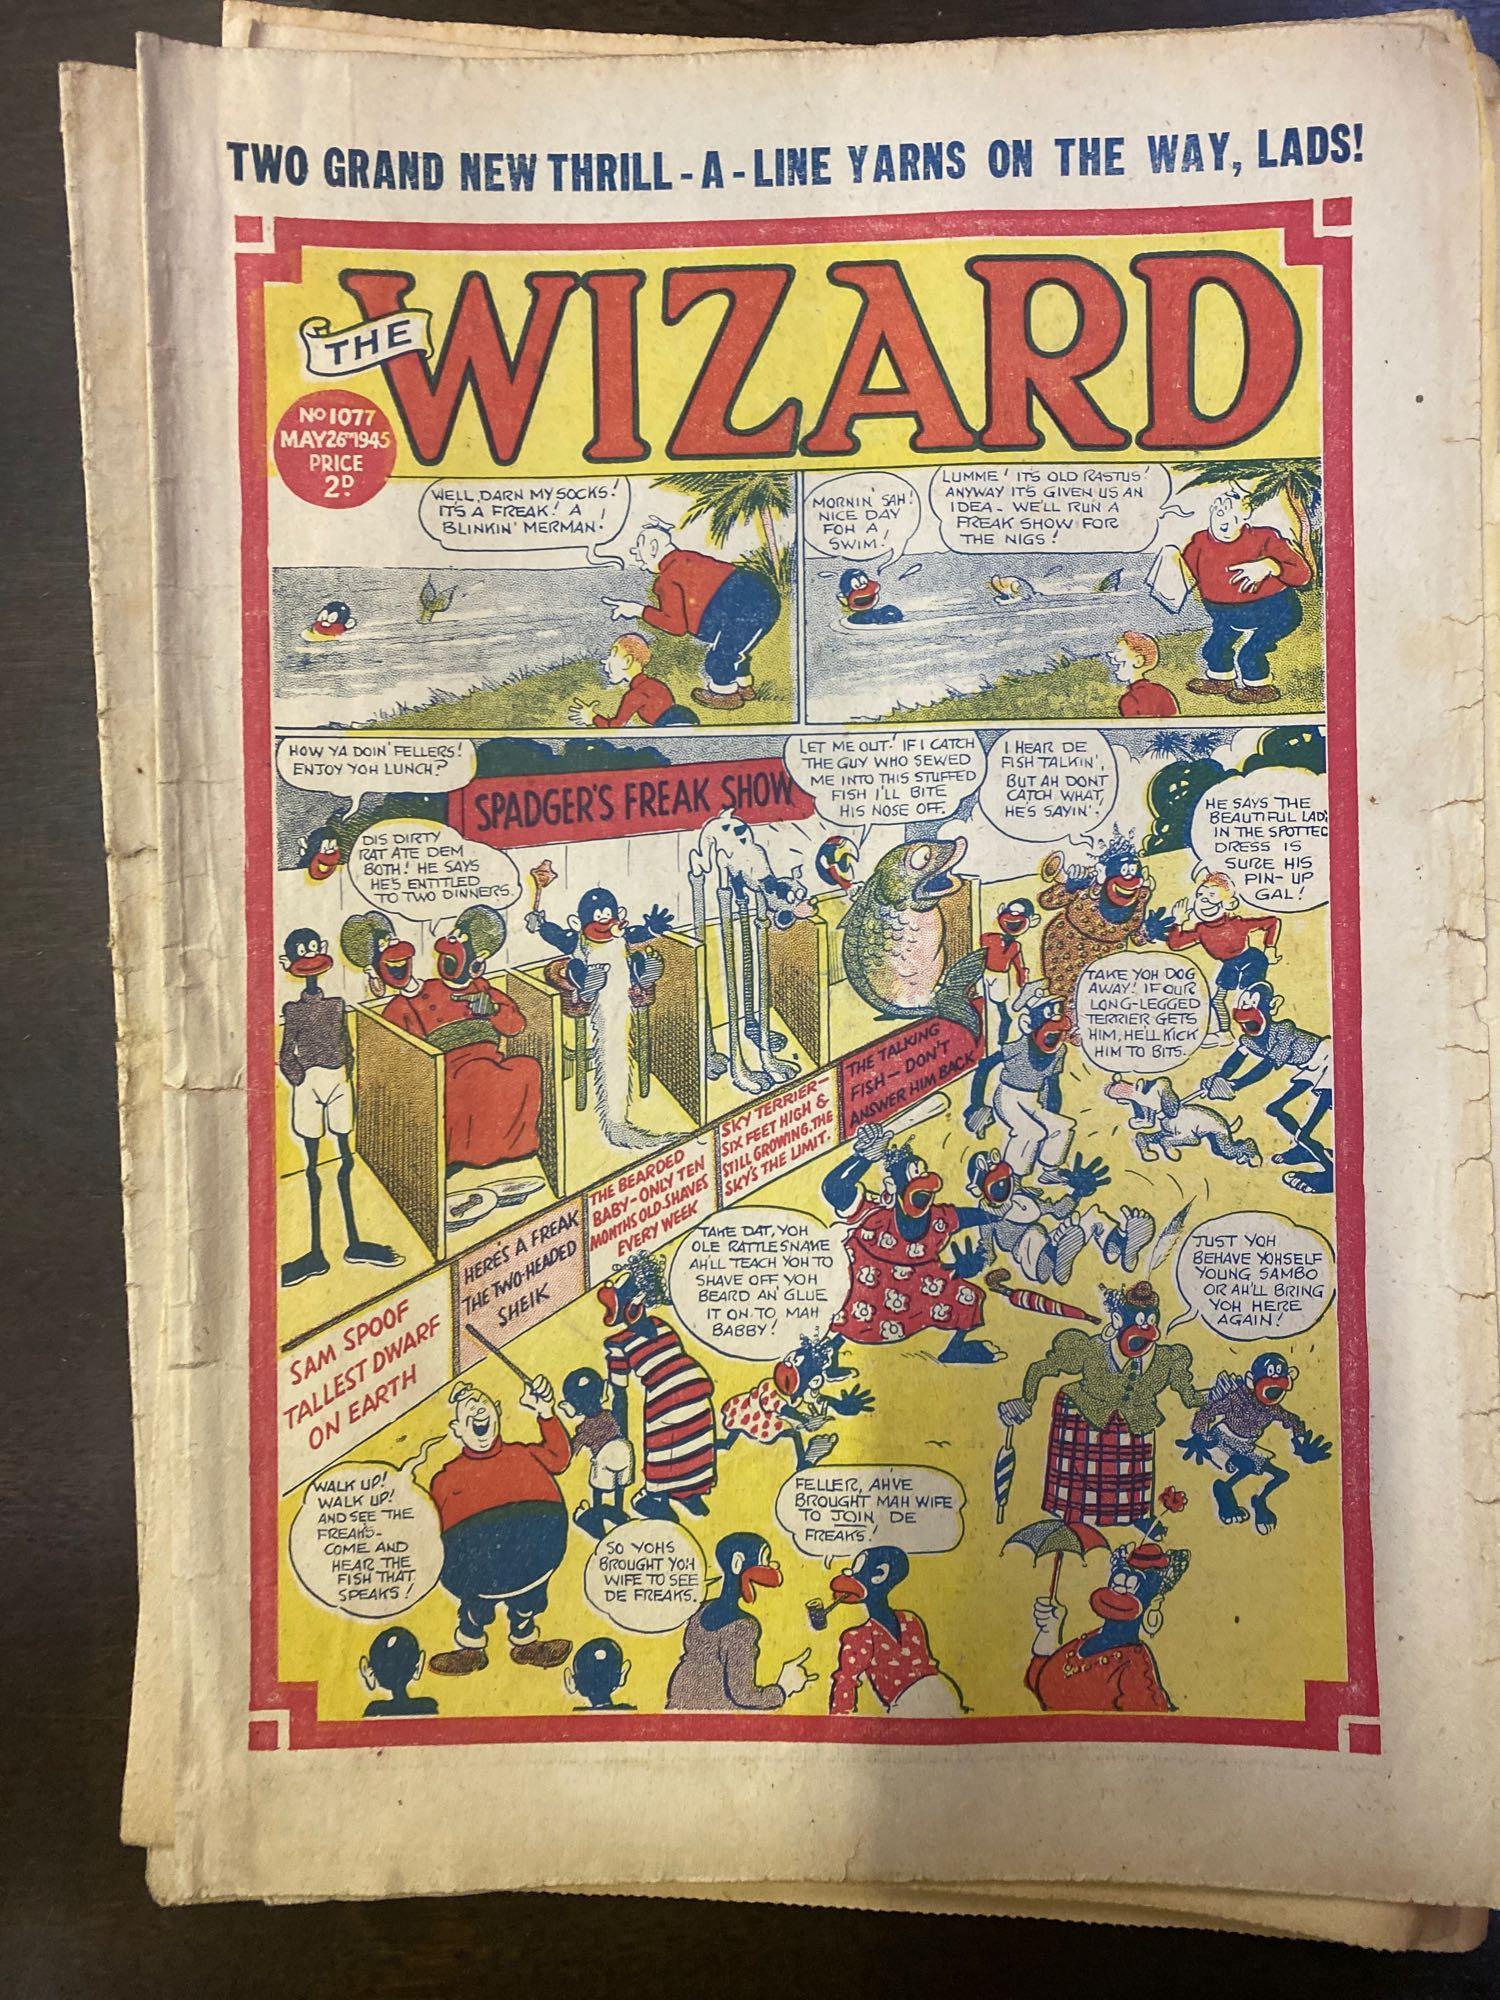 A quantity of vintage comics and childrens newspapers - Image 31 of 124